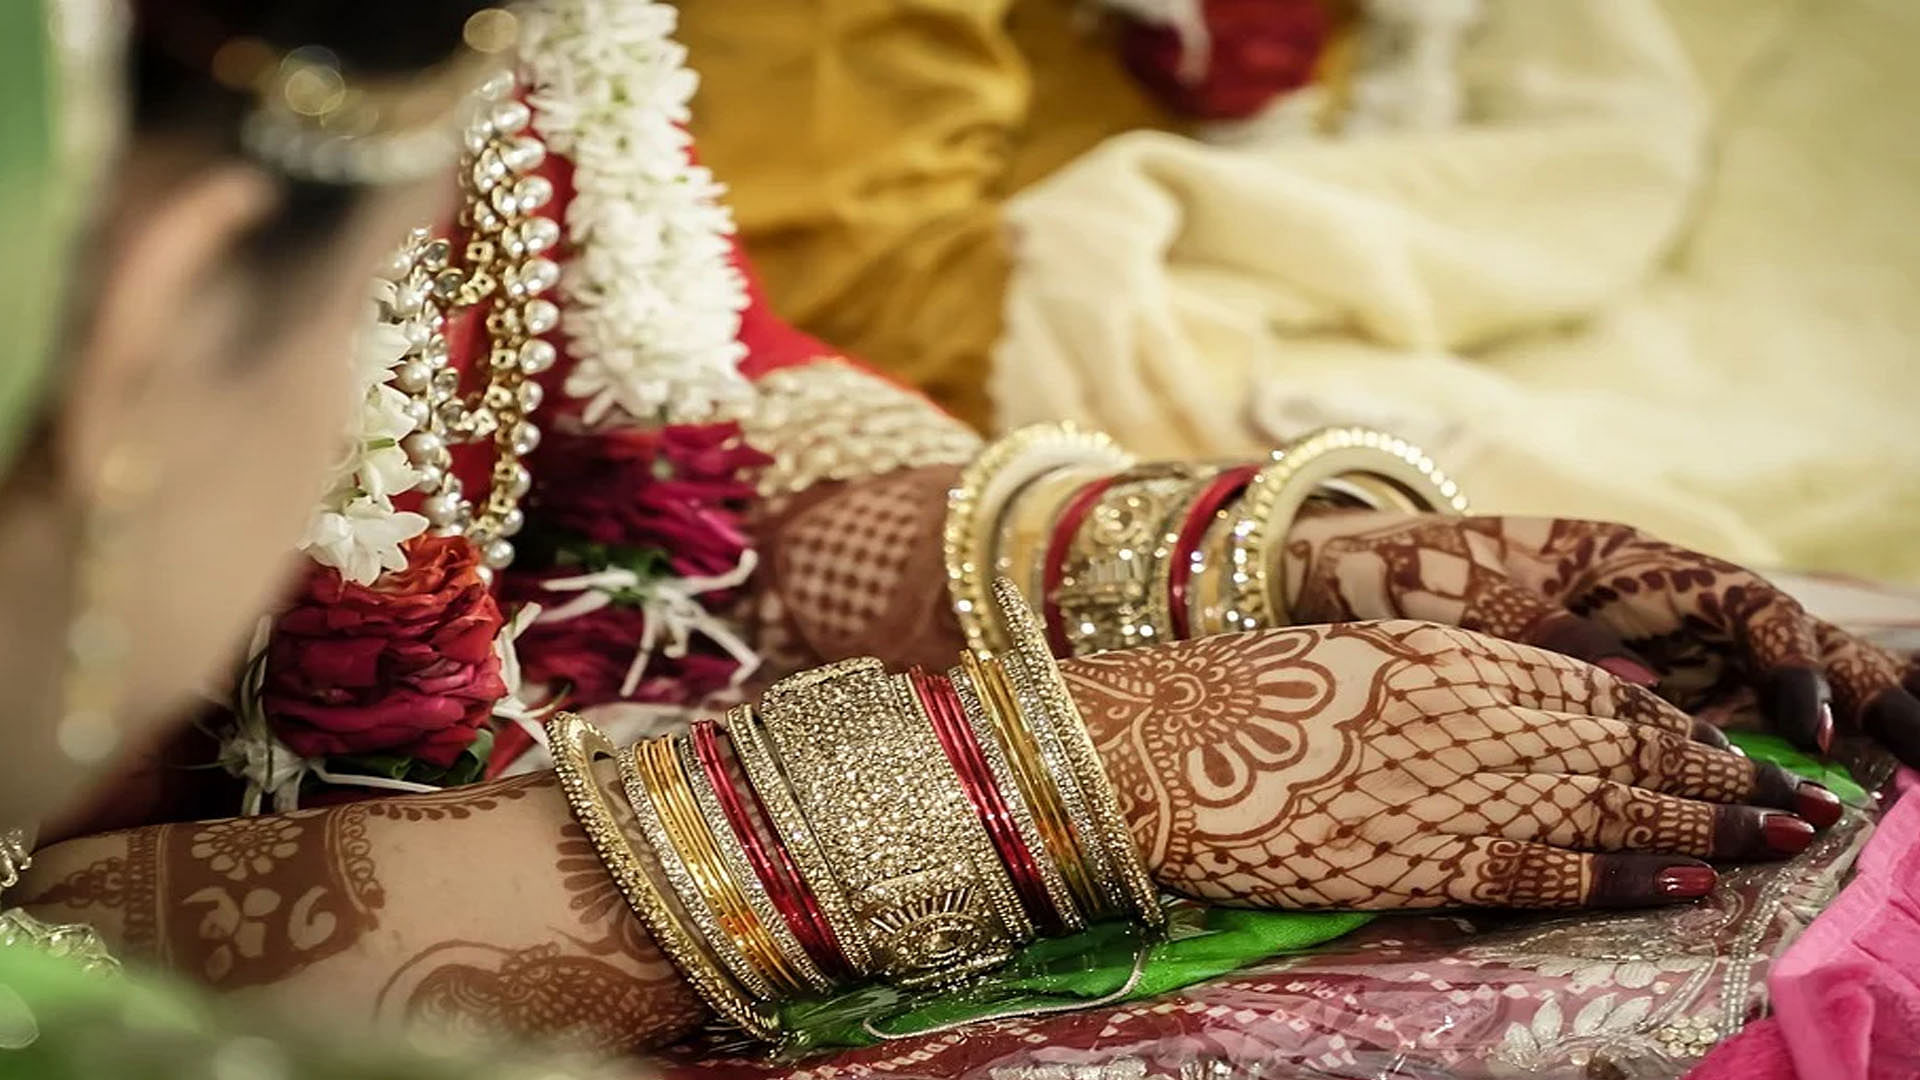 Just before Jaimala bride saw such a thing in groom that she fainted and returned the barat